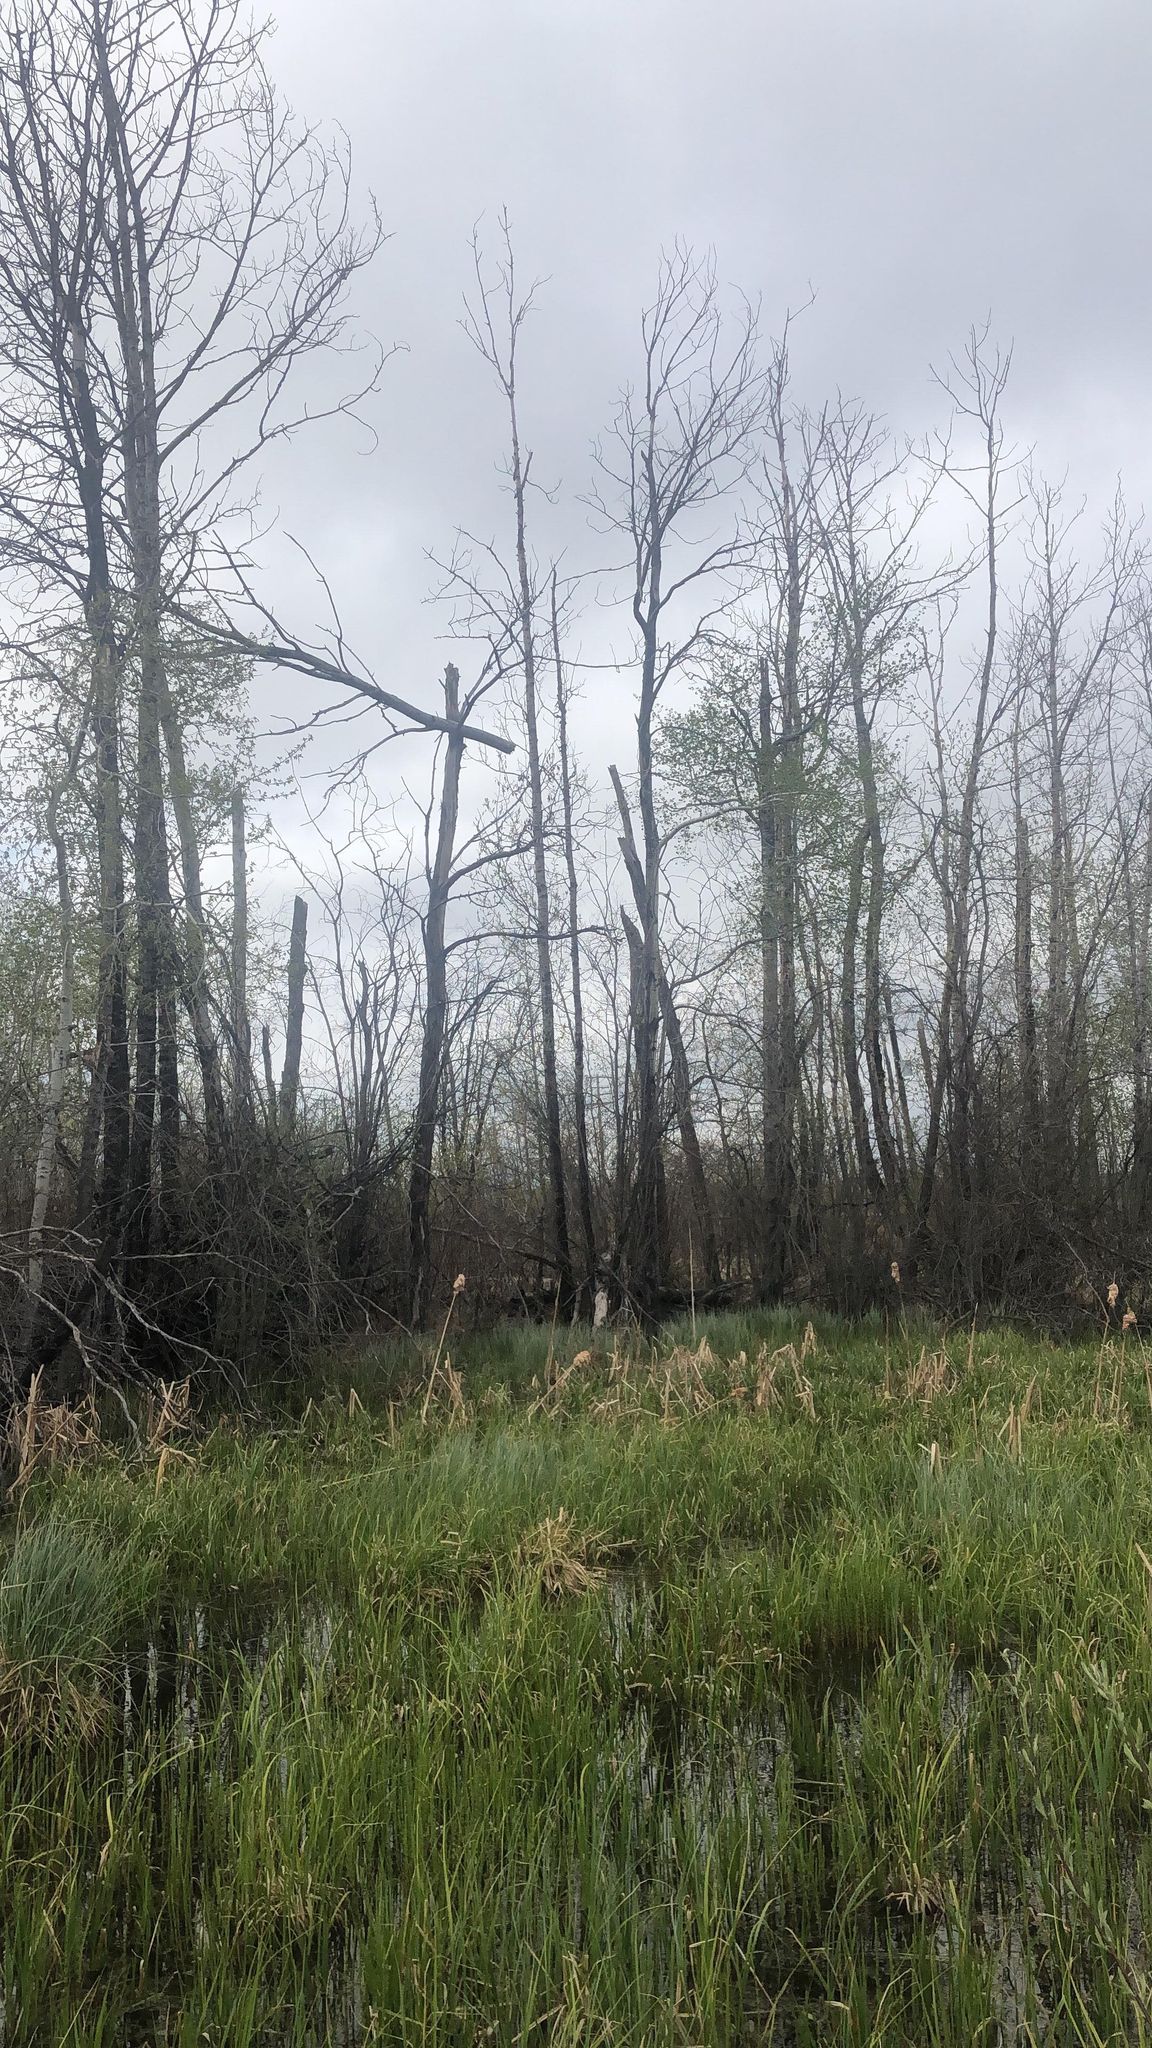 Tall, barren trees loom behind, a thick and dense swamp all around